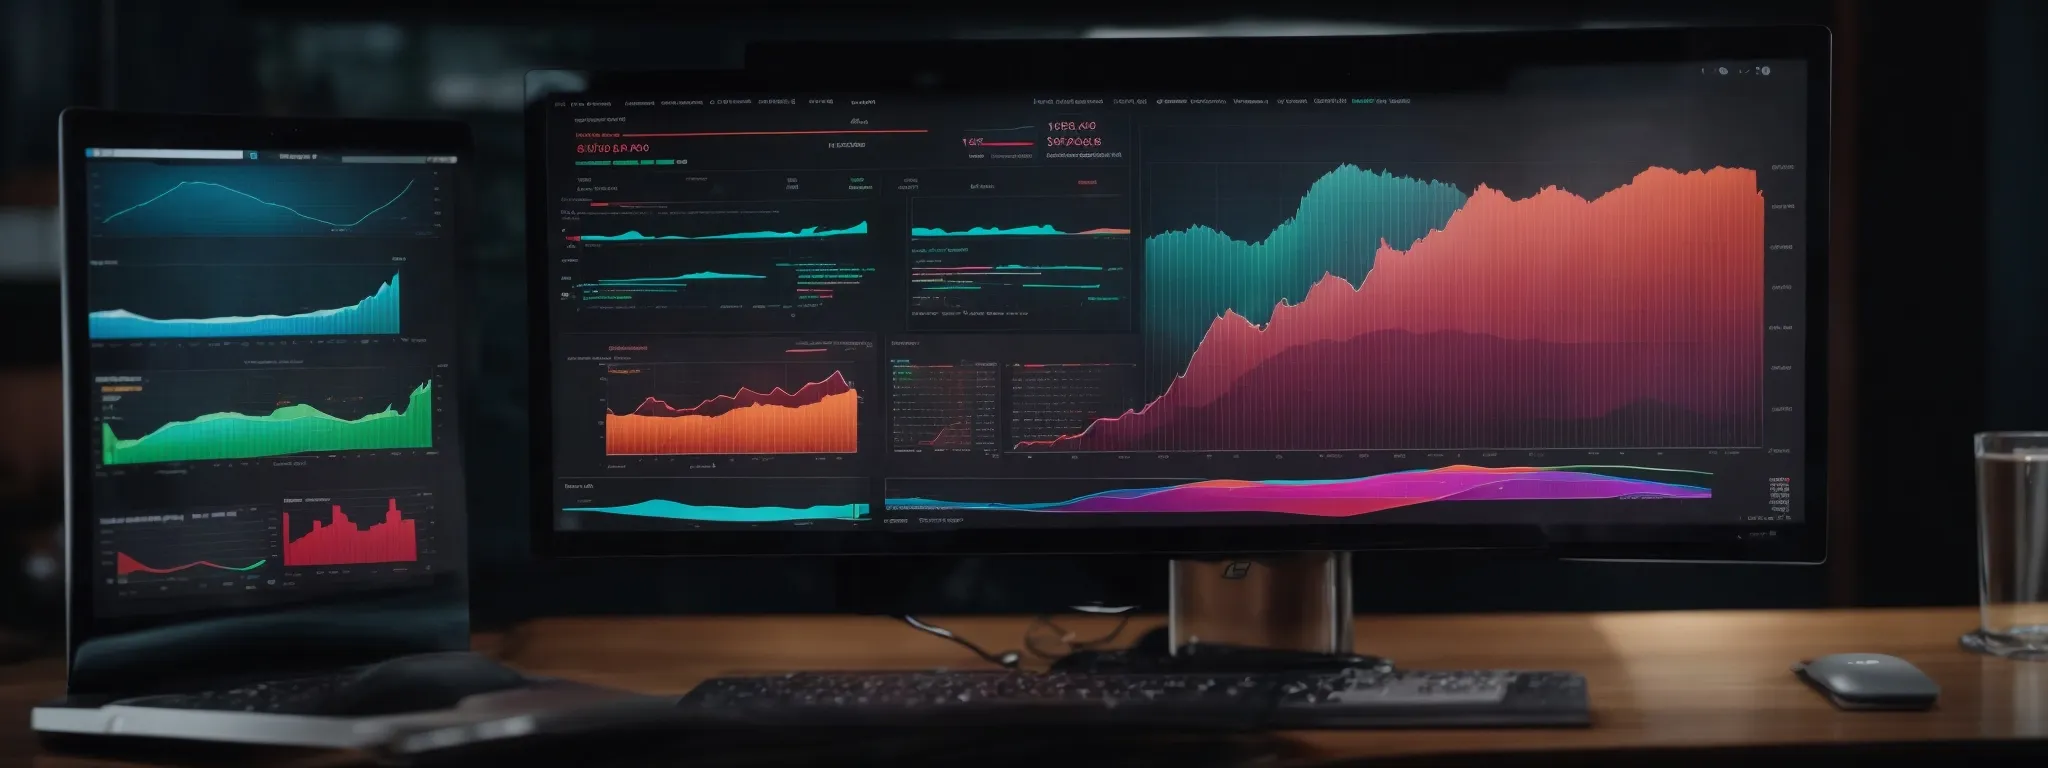 a computer screen displaying colorful graphs and data analytics for marketing campaigns.